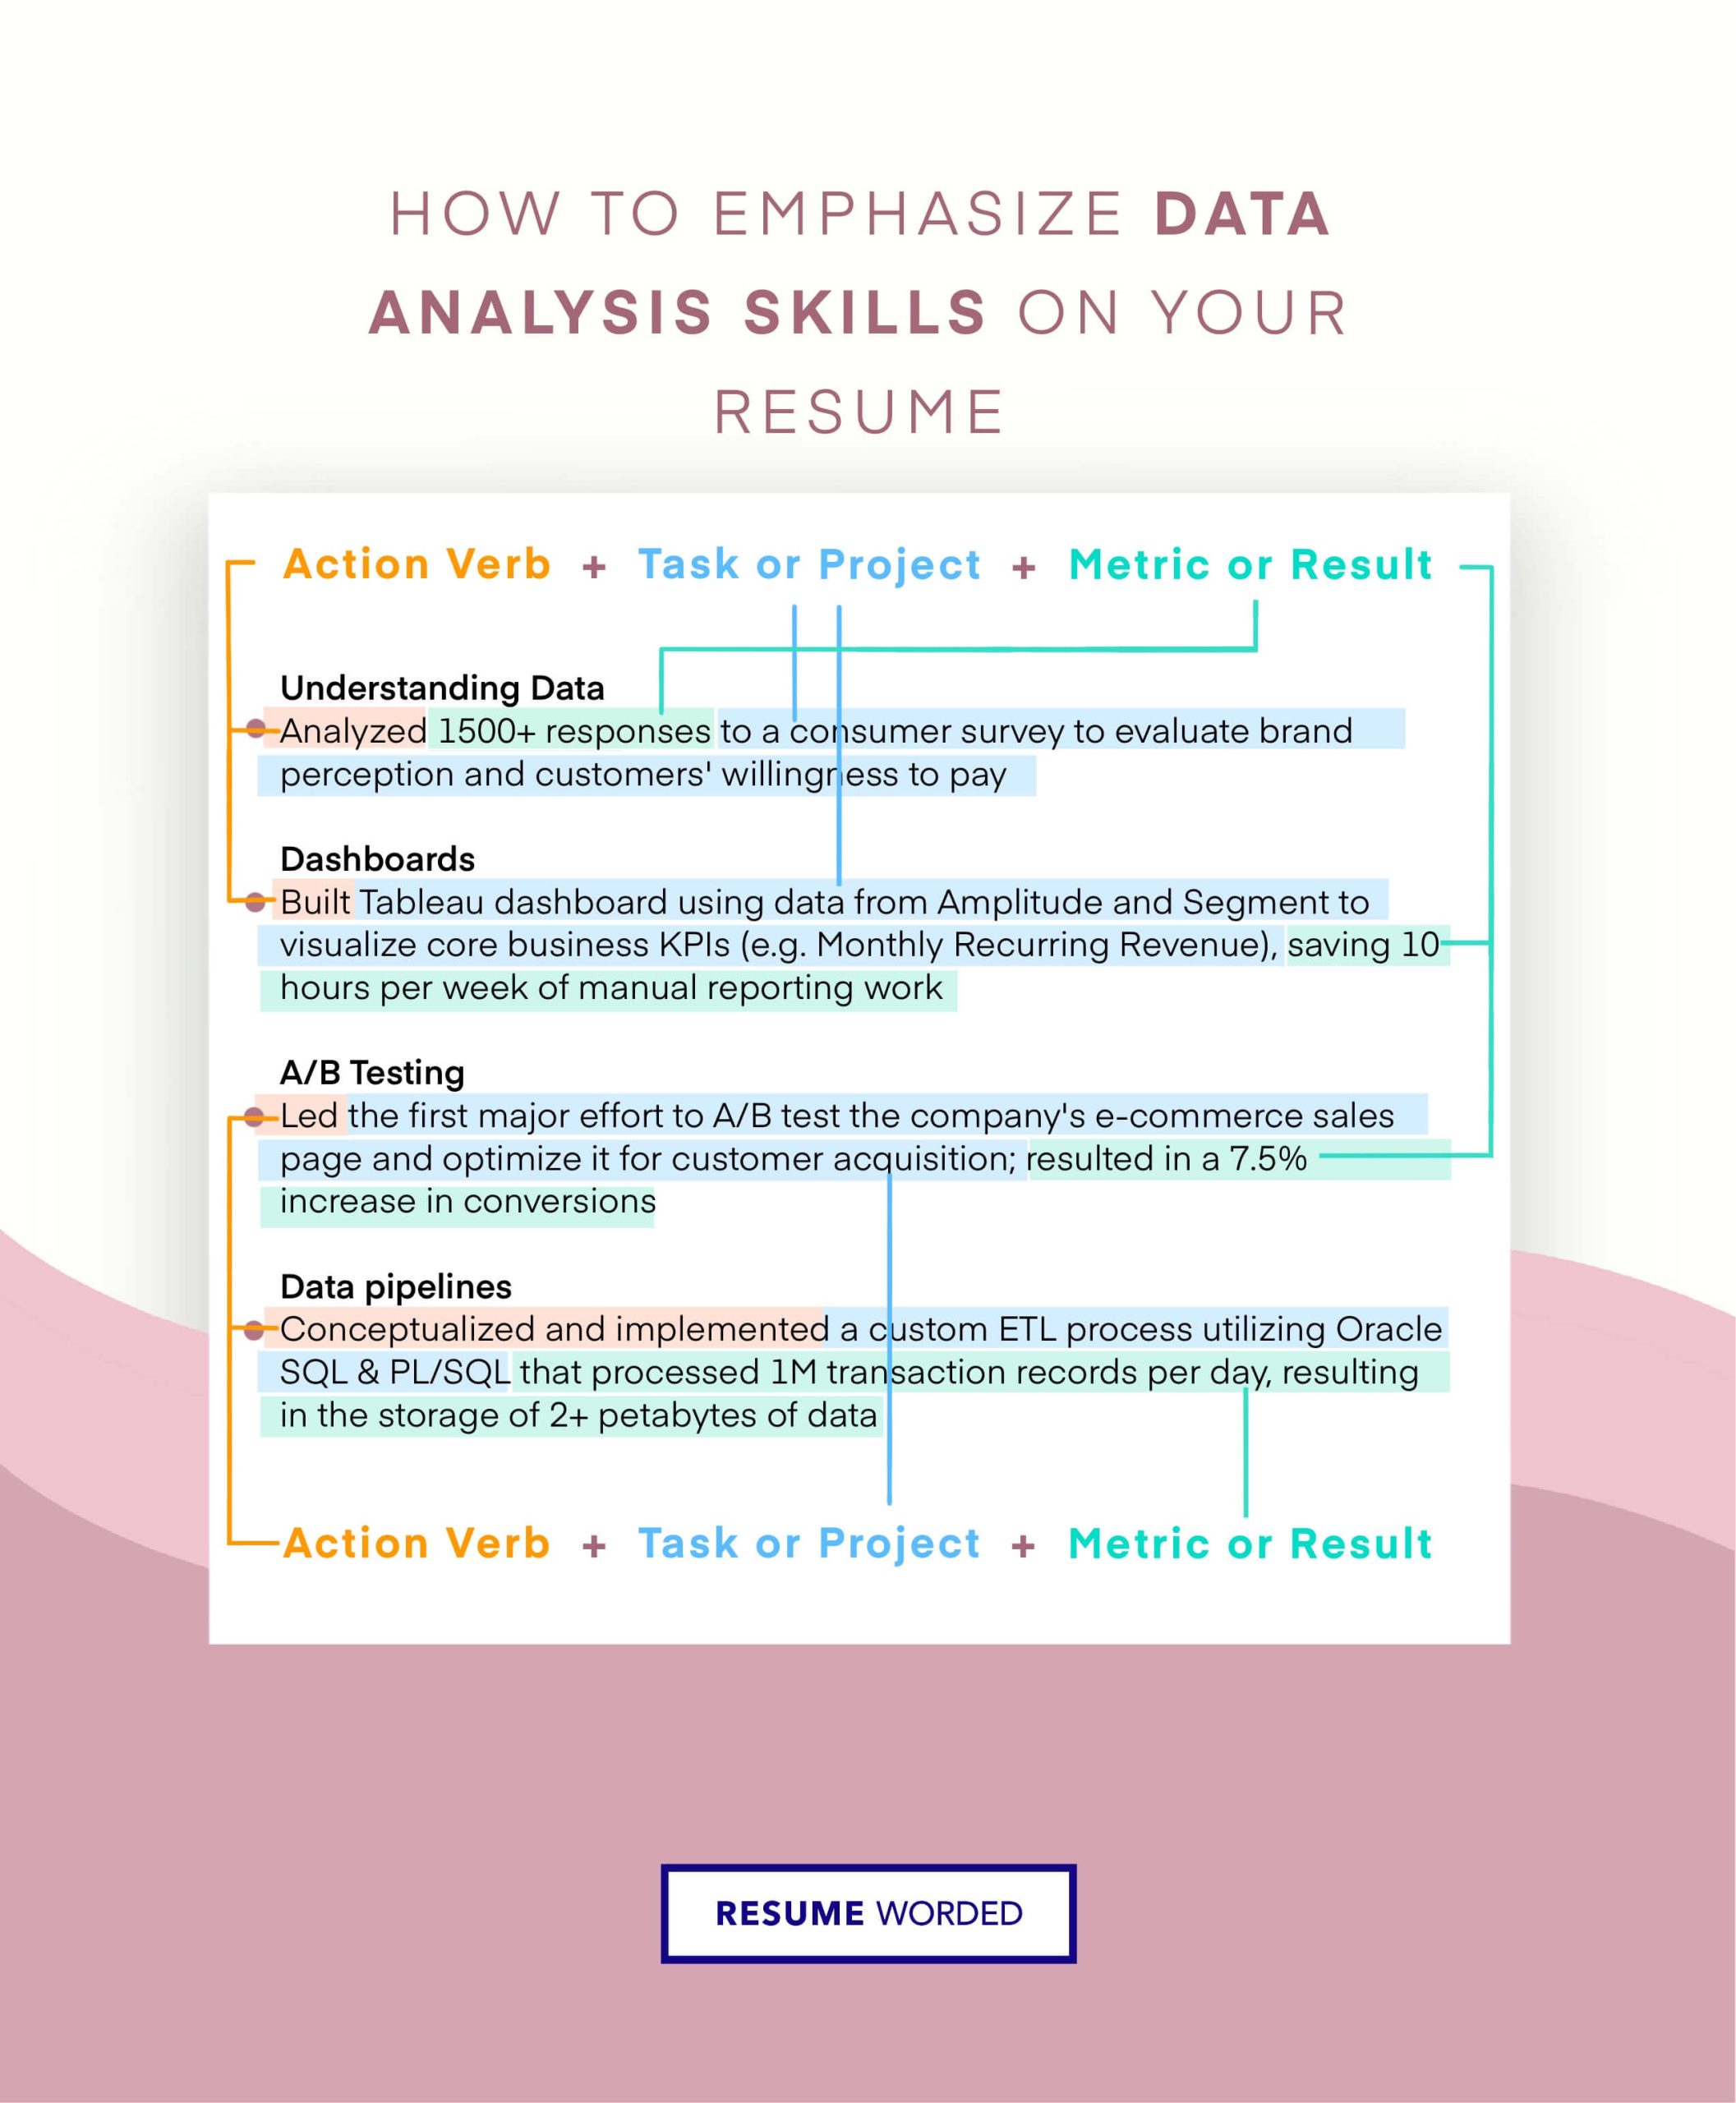 Business Analyst Sample Resume Pci assets Resume Skills and Keywords for Information Security Analyst …